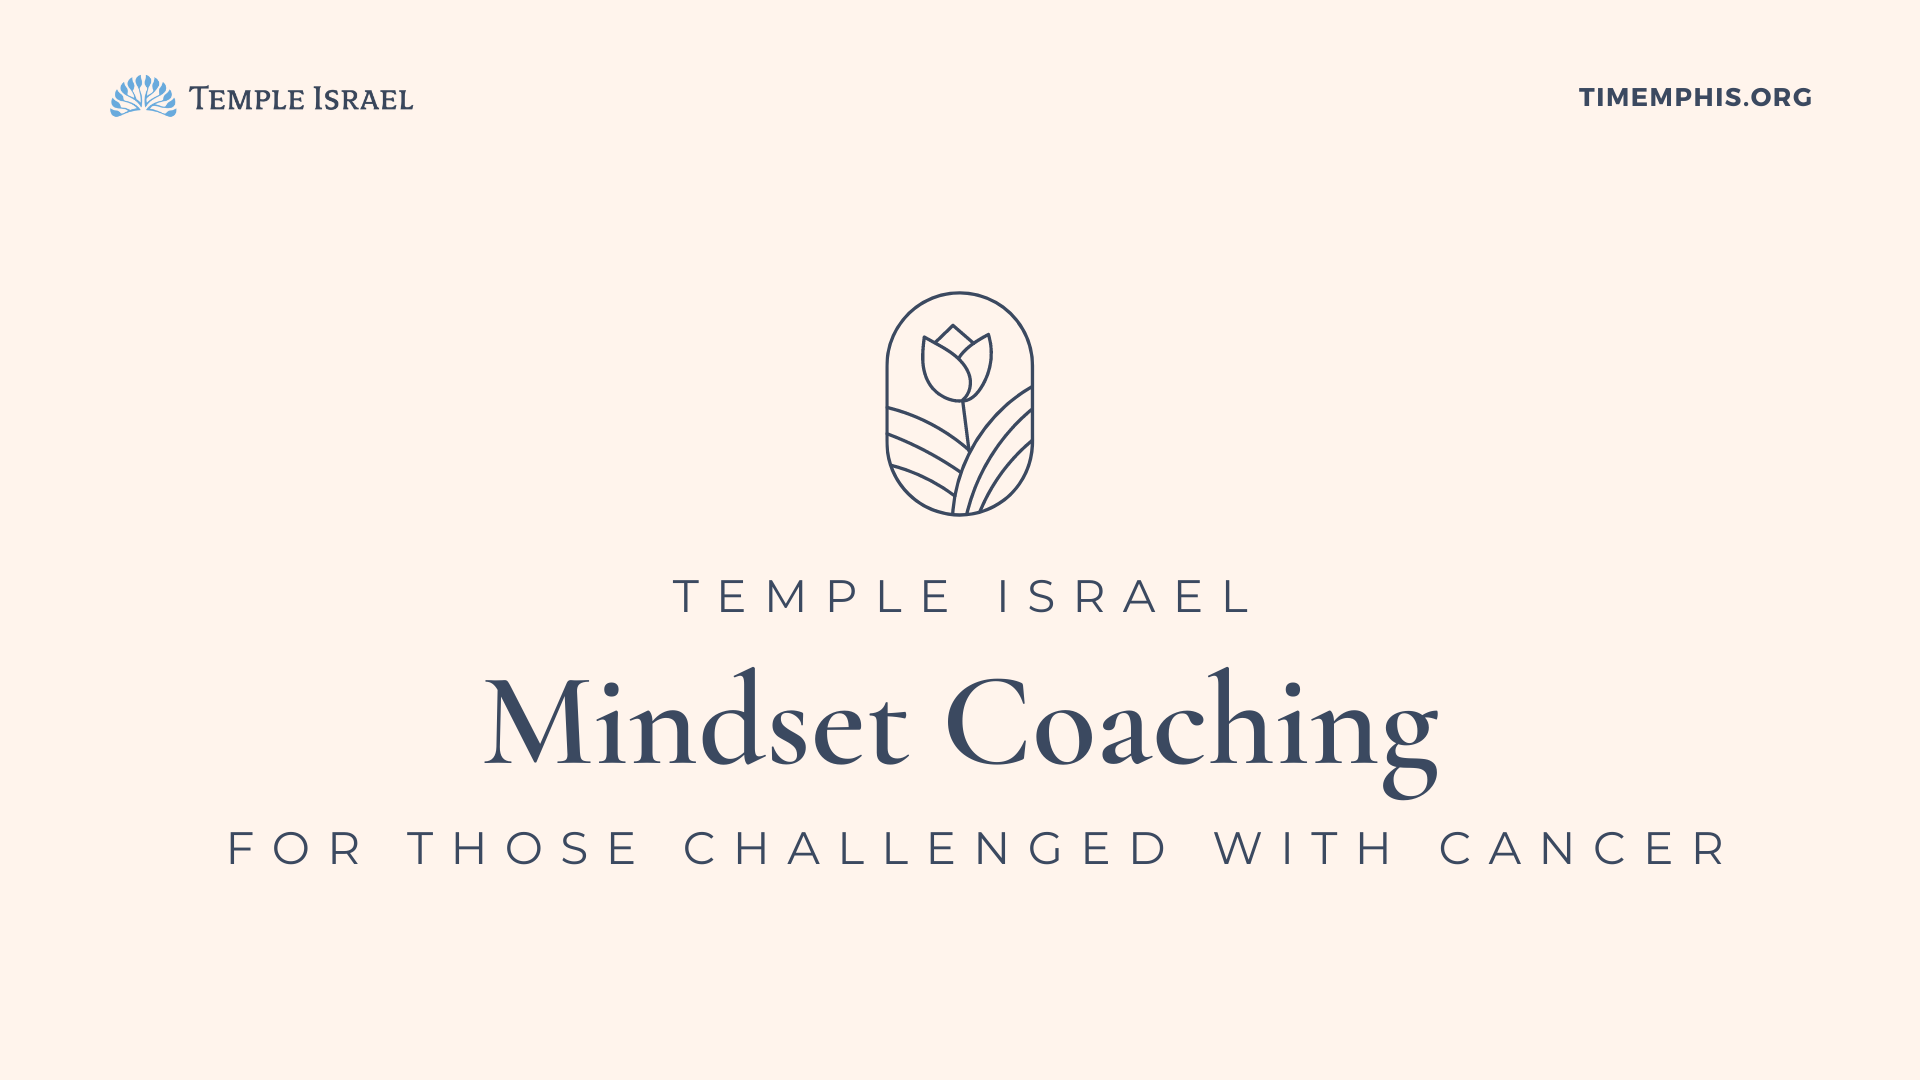 Mindset Coaching for Those Challenged with Cancer